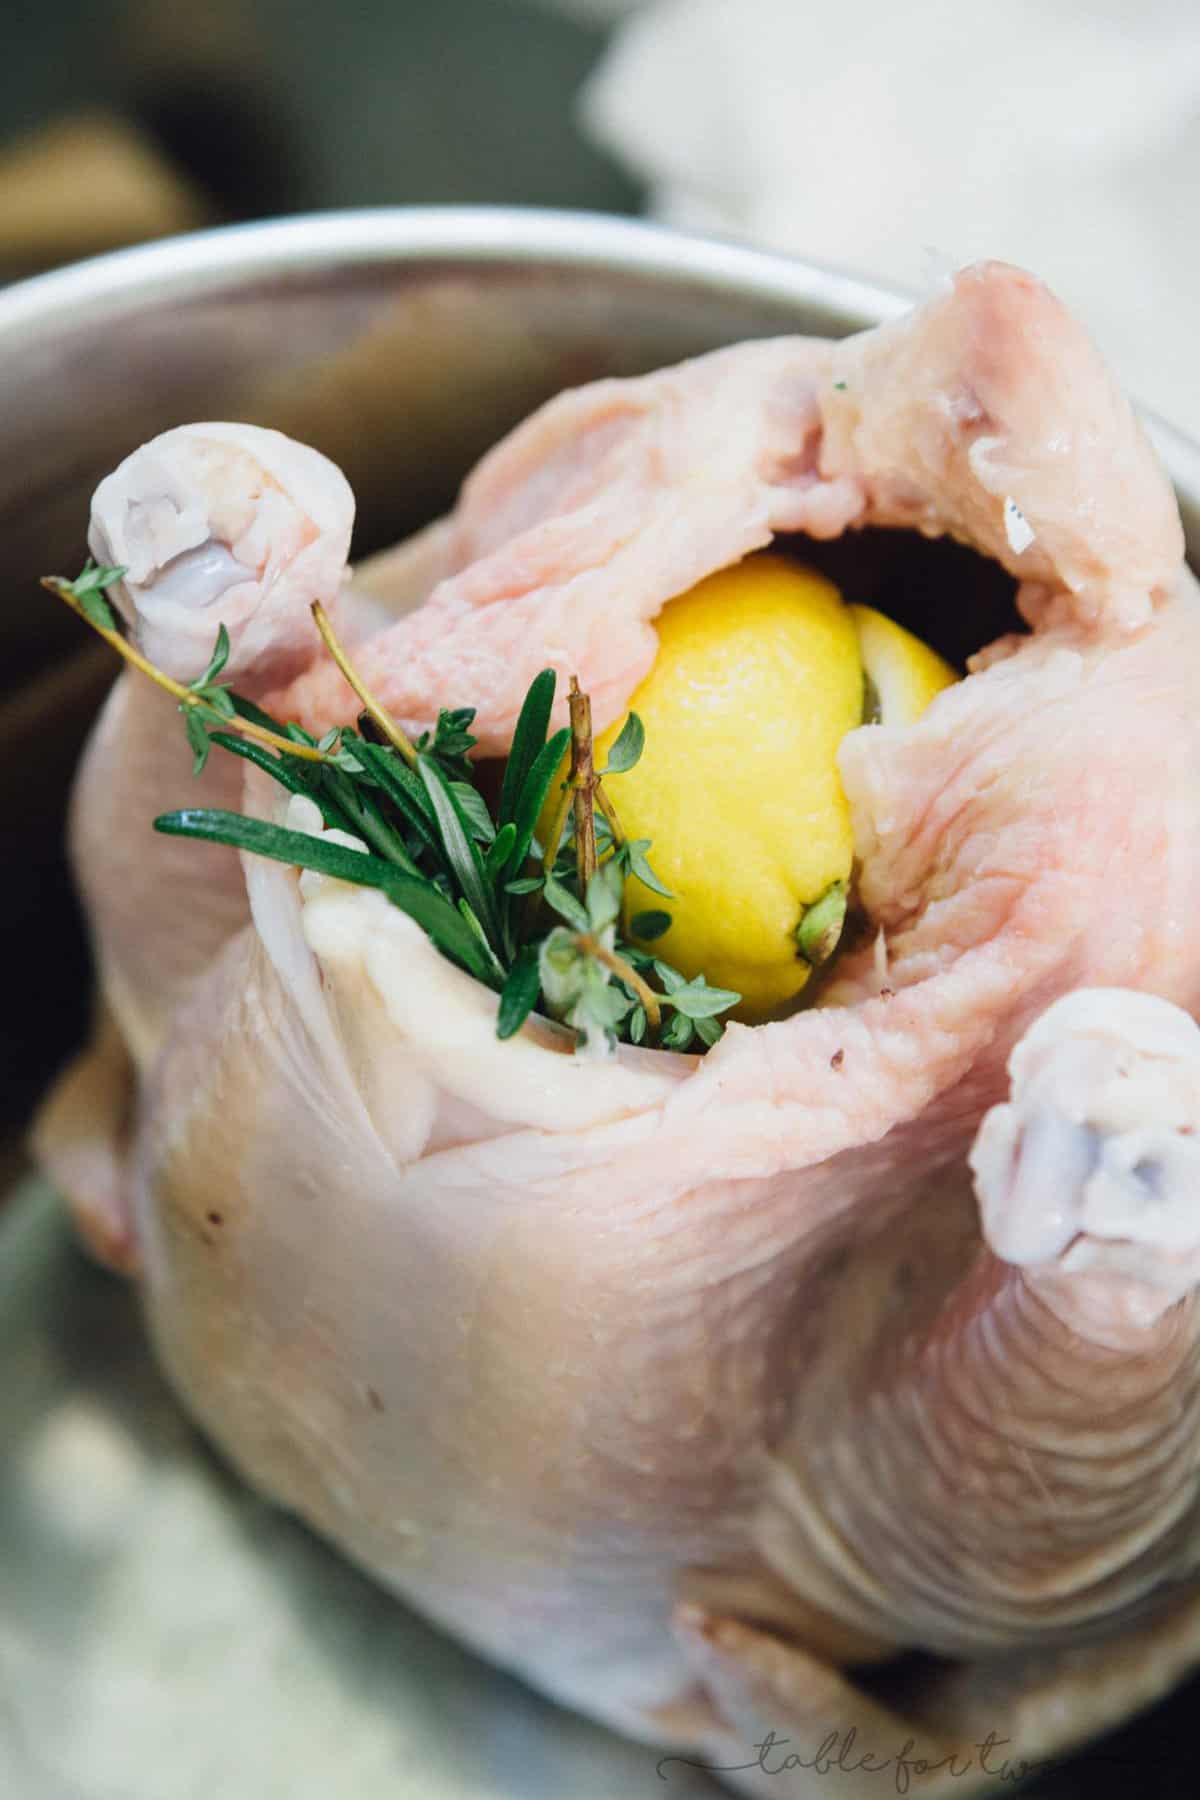 Ever thought to make a whole chicken in the pressure cooker? It comes out so tender and juicy! A great alternative to the regular bird on Thanksgiving Day and a way to free up oven space!